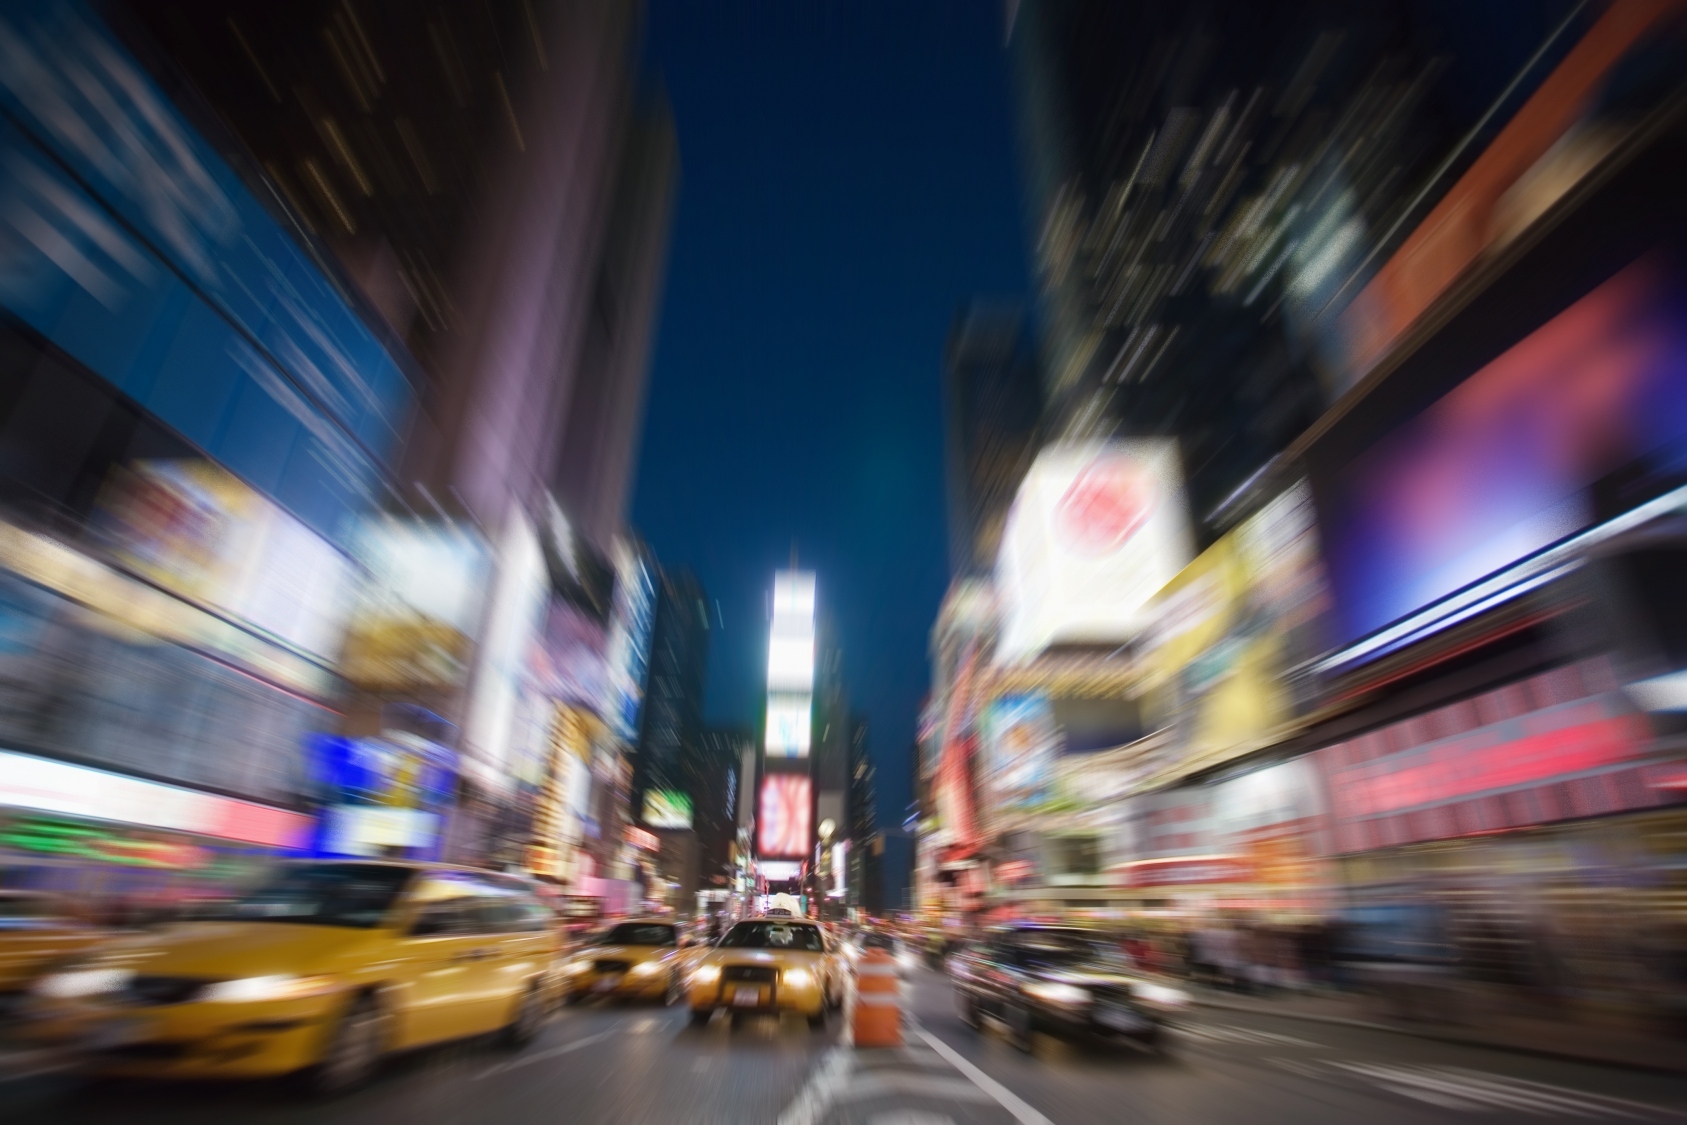 cars zoom past on broadway in times square at night.  radial blur